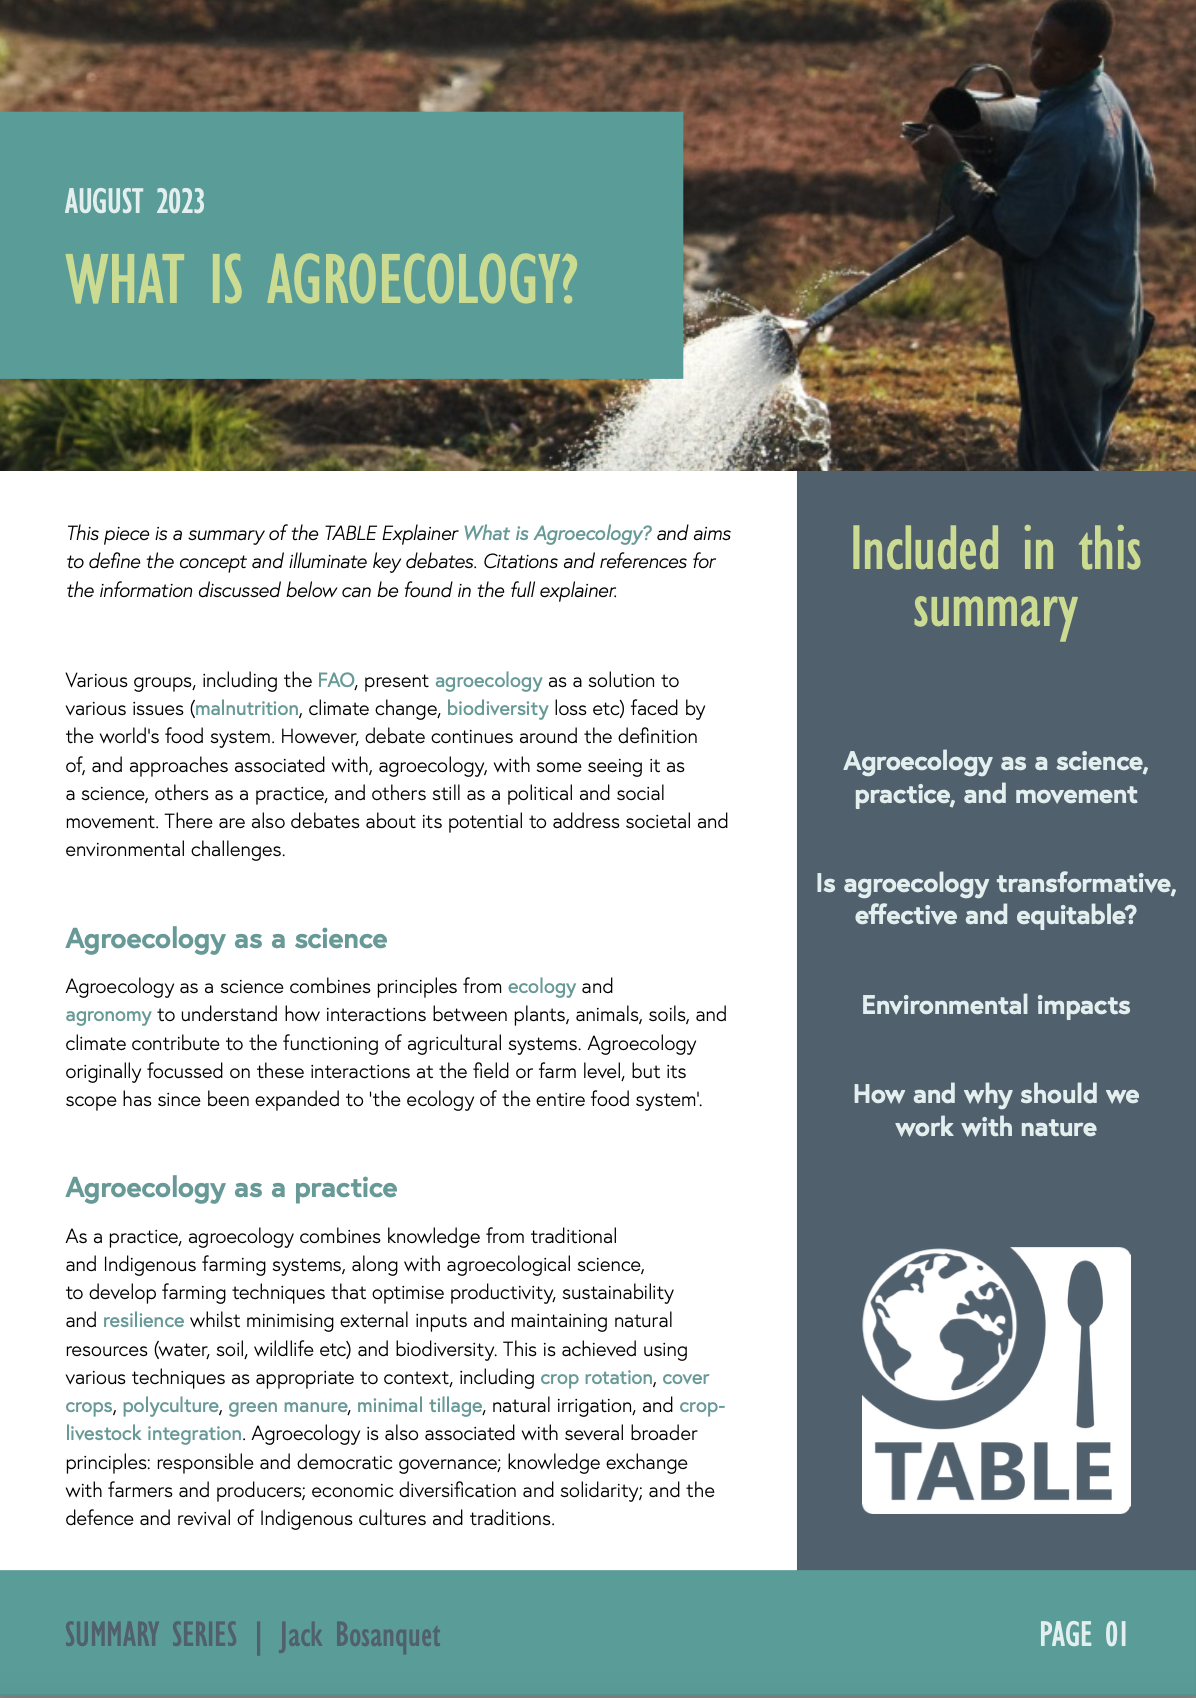 The first page of the agroecology explainer summary published by TABLE